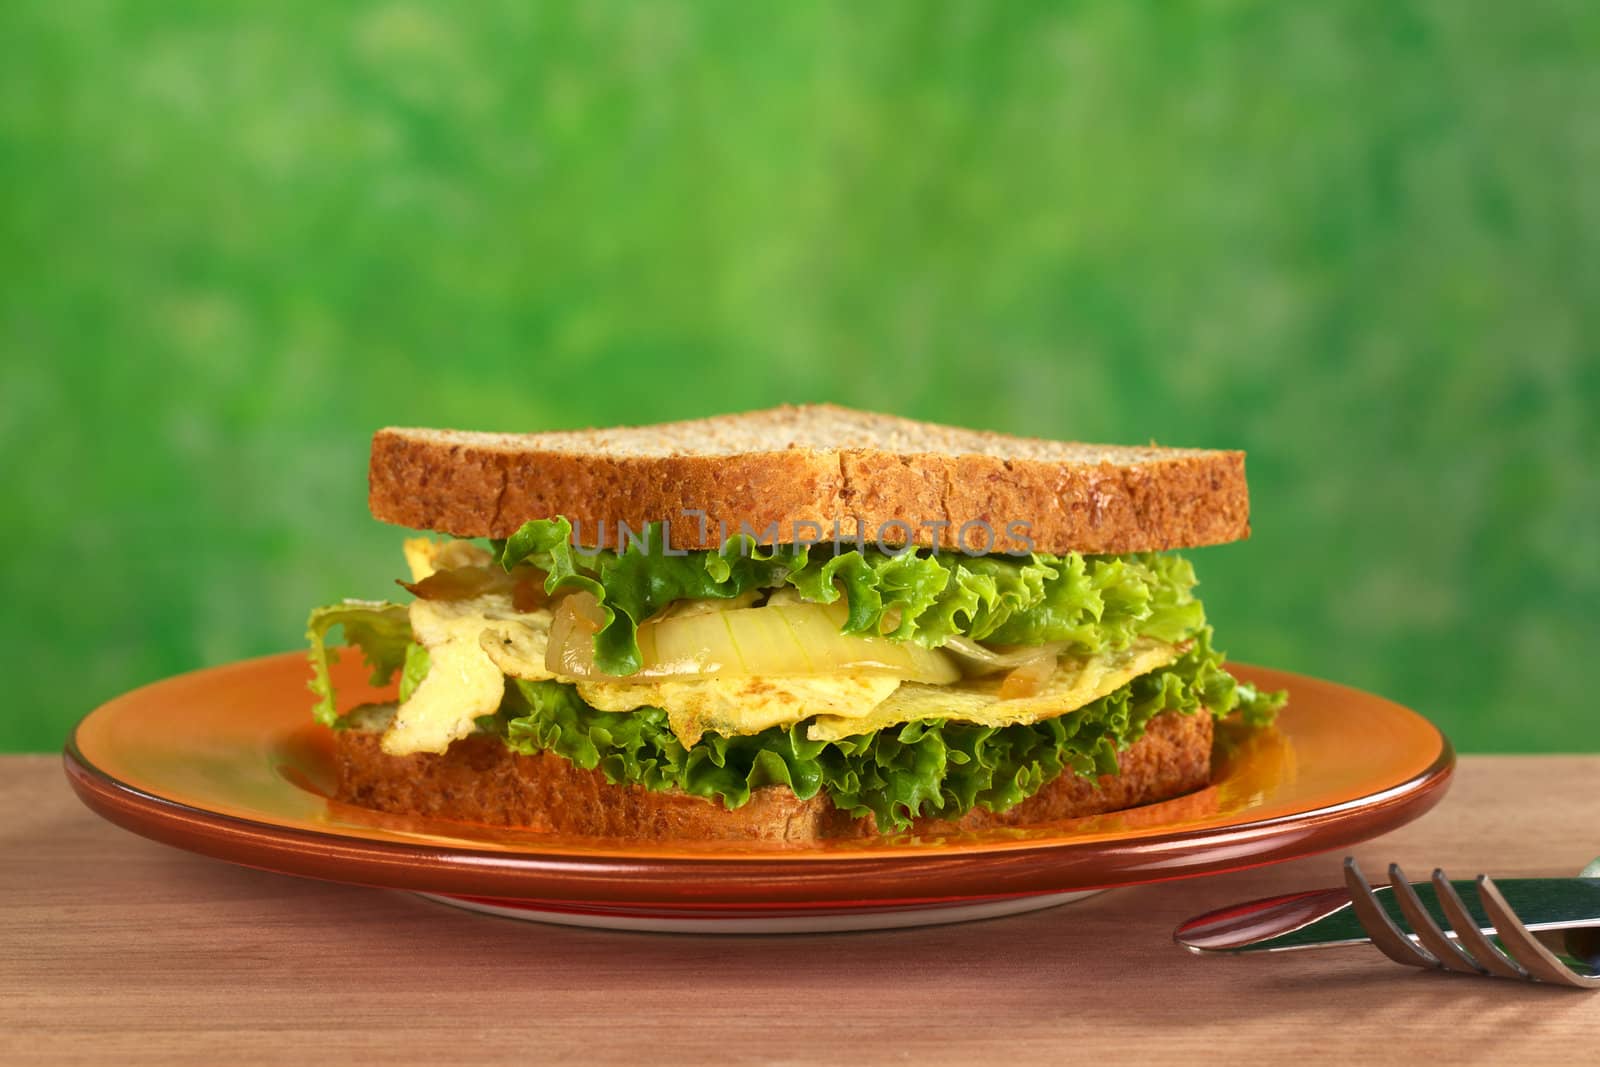 Scrambled eggs sandwich with fried onions and lettuce (Selective Focus, Focus on the front of the sandwich)